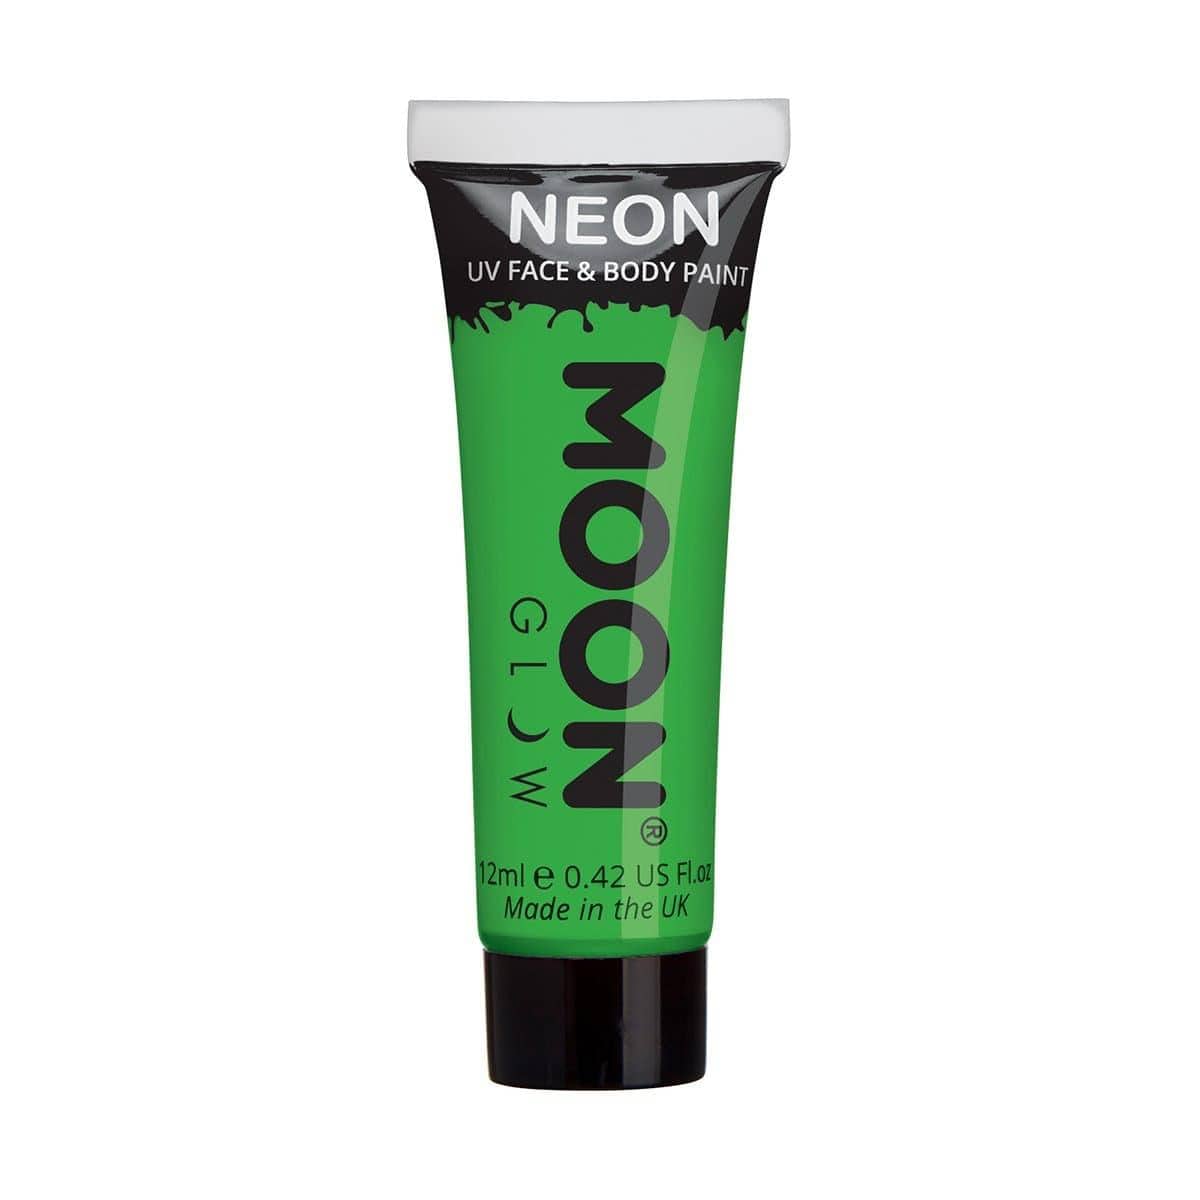 Buy Costume Accessories Moon green neon UV face & body paint sold at Party Expert